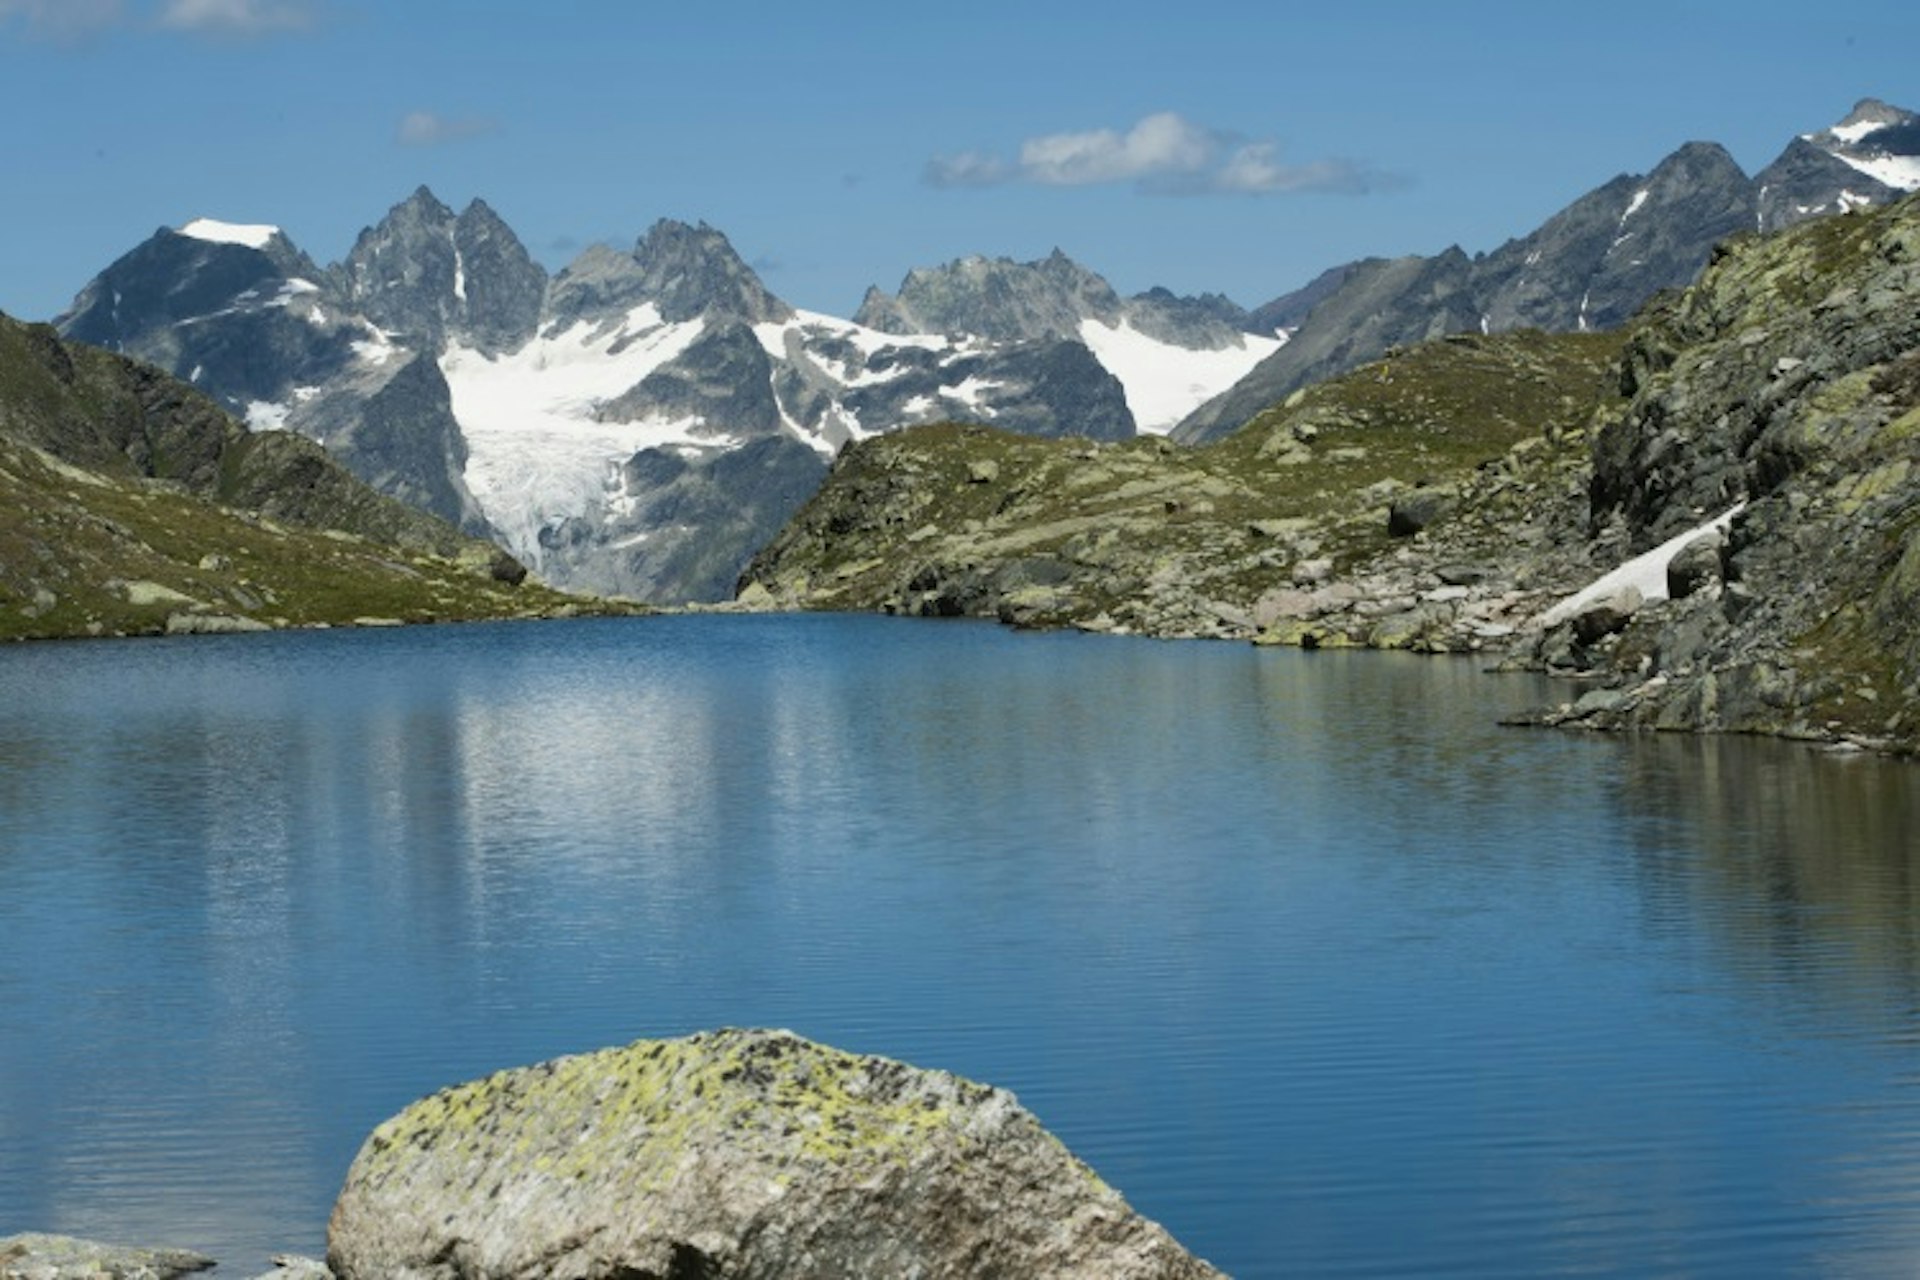 The snow-capped high-alpine plateau of Macun. Image courtesy of the Swiss National Park.